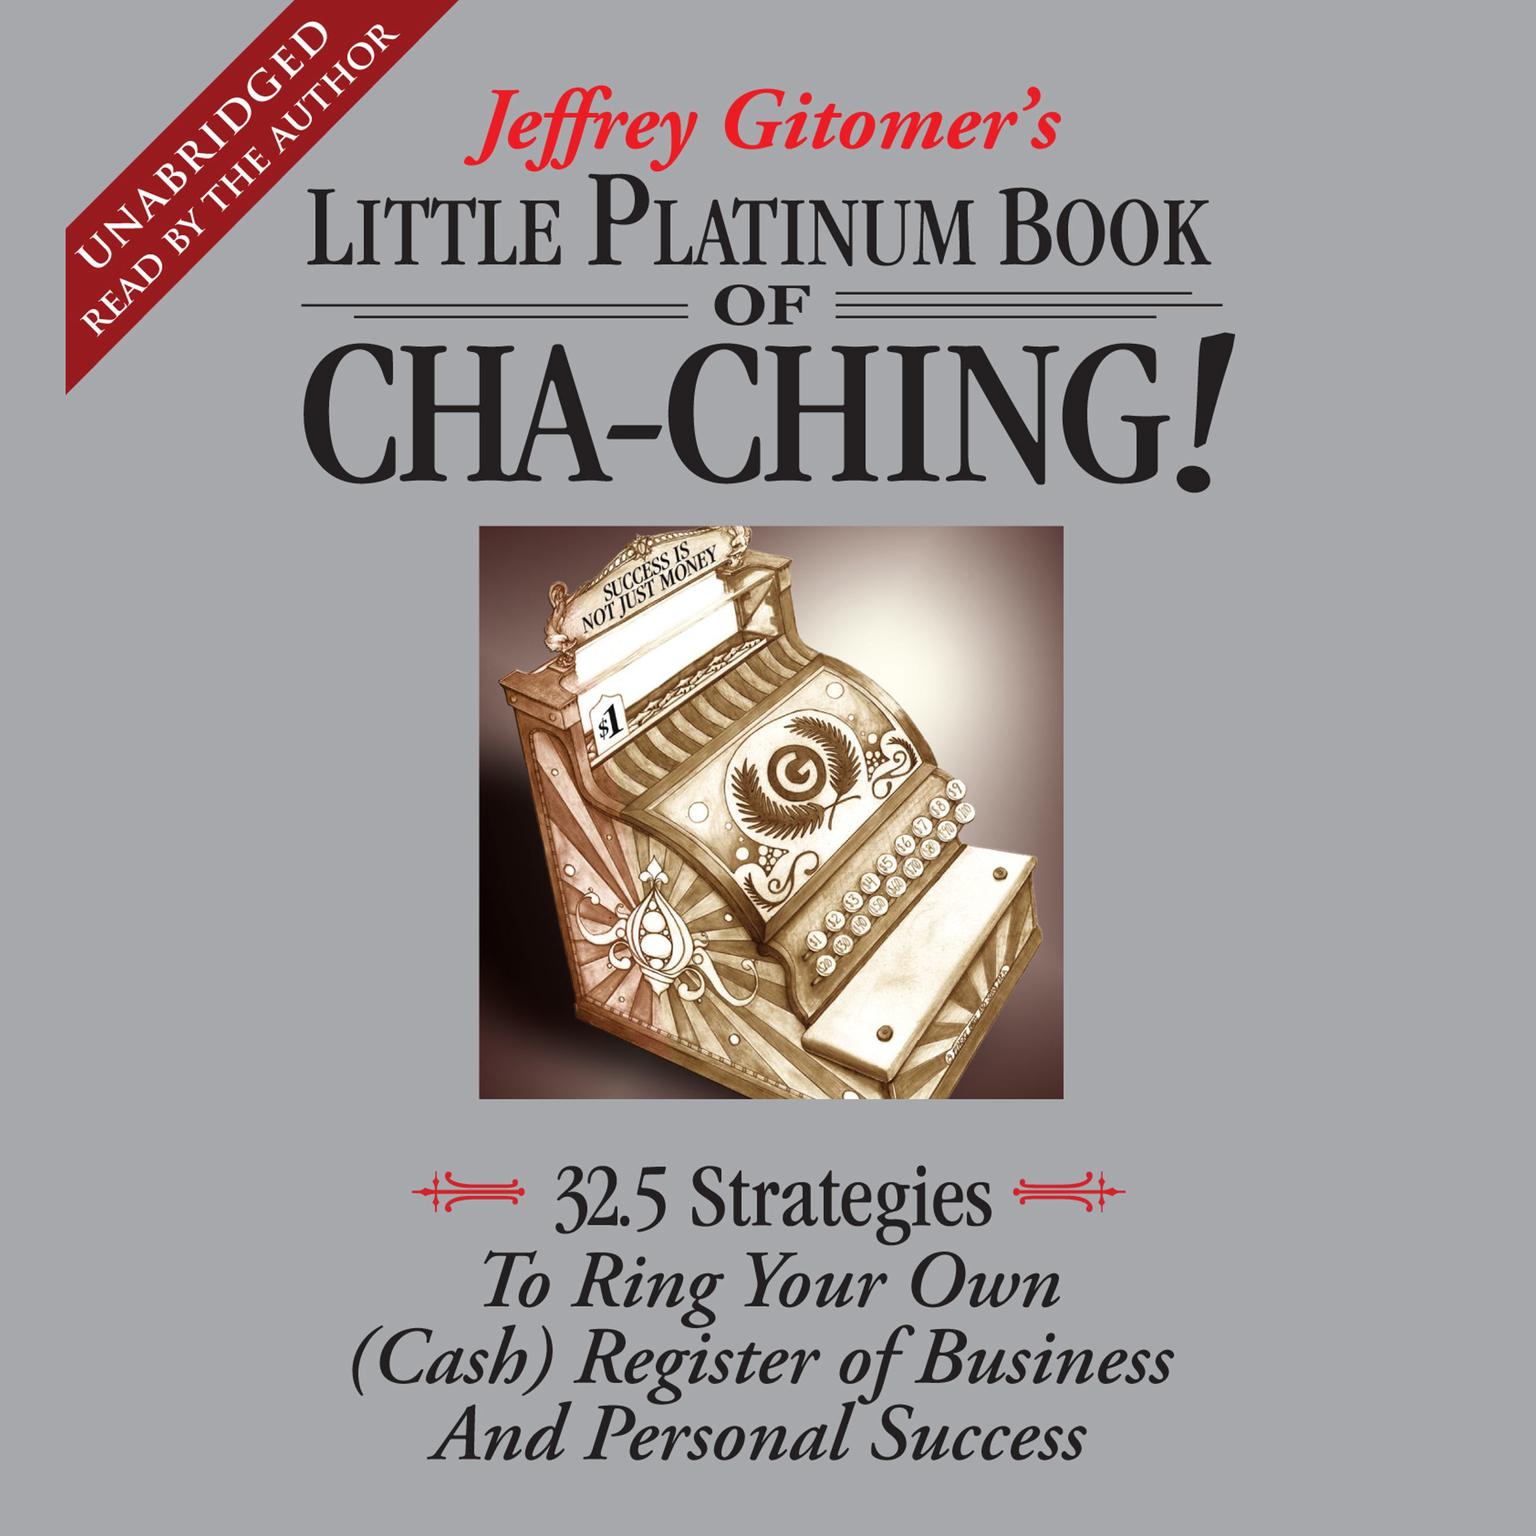 The Little Platinum Book of Cha-Ching: 32.5 Strategies to Ring Your Own (Cash) Register in Business and Personal Success Audiobook, by Jeffrey Gitomer